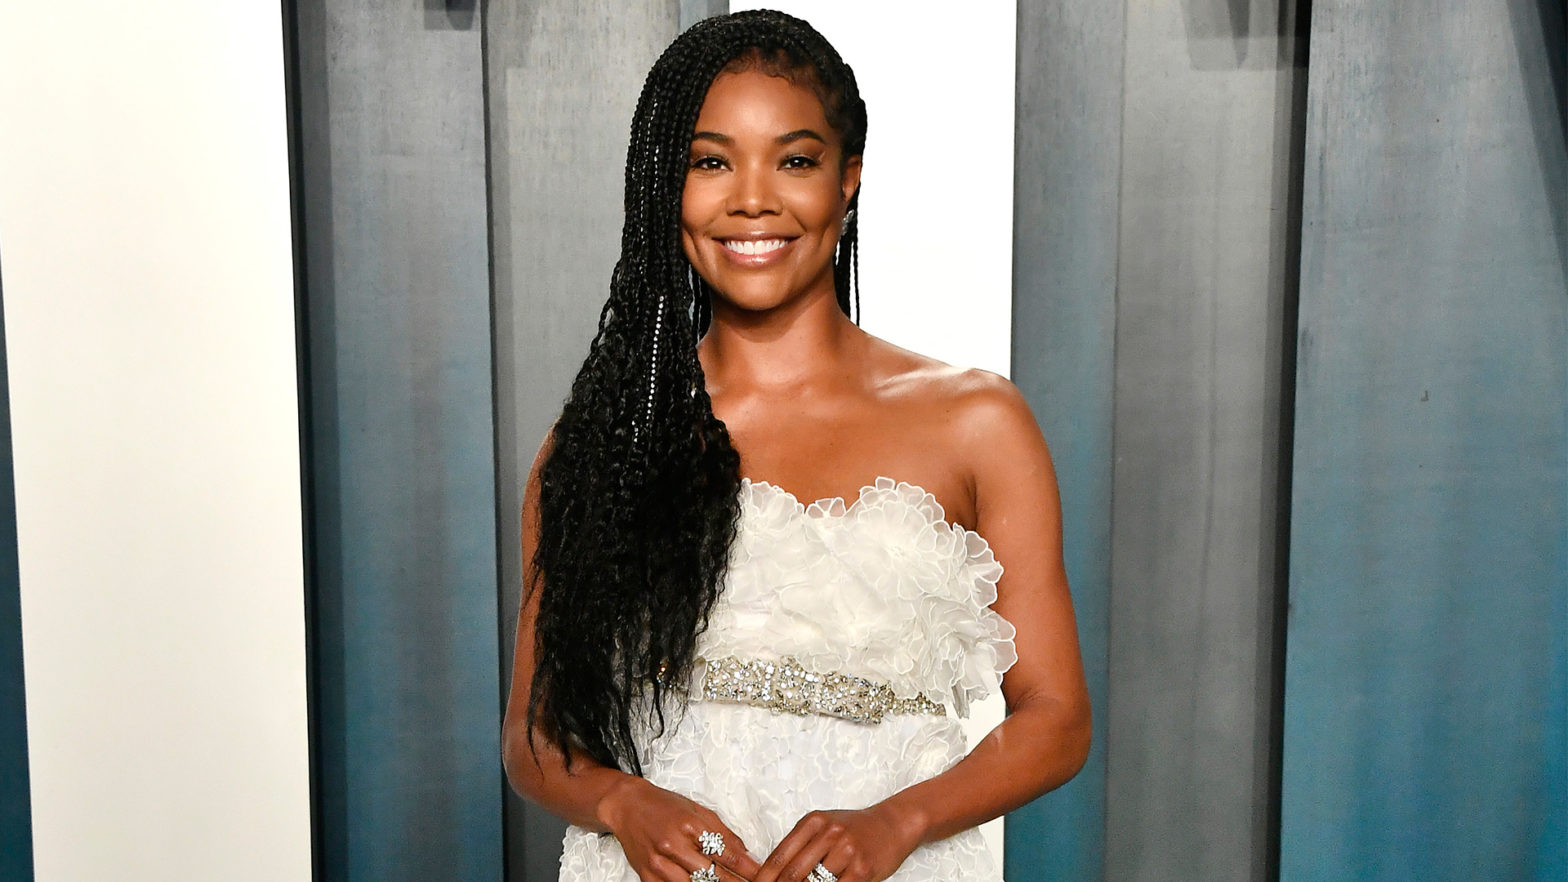 Gabrielle Union Opens Up About Flawless And Entrepreneurial Struggles — 'I Made That Initial Deal Out Of Fear'